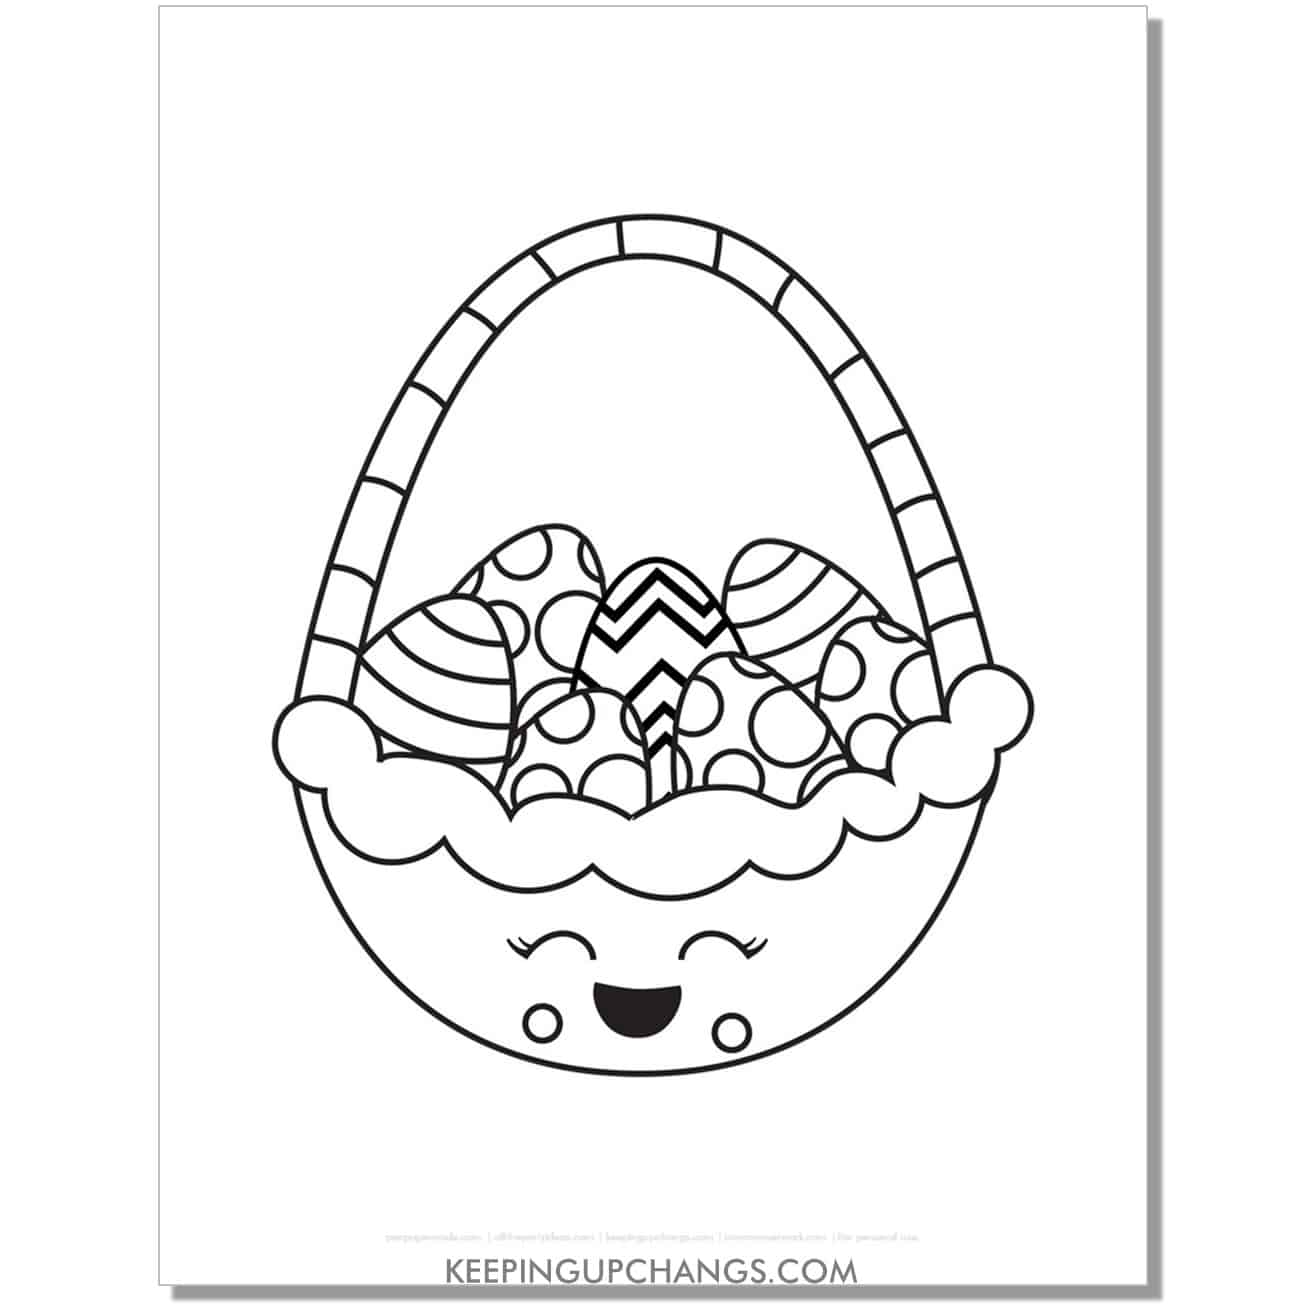 Easter basket with cute, kawaii face coloring page, sheet.